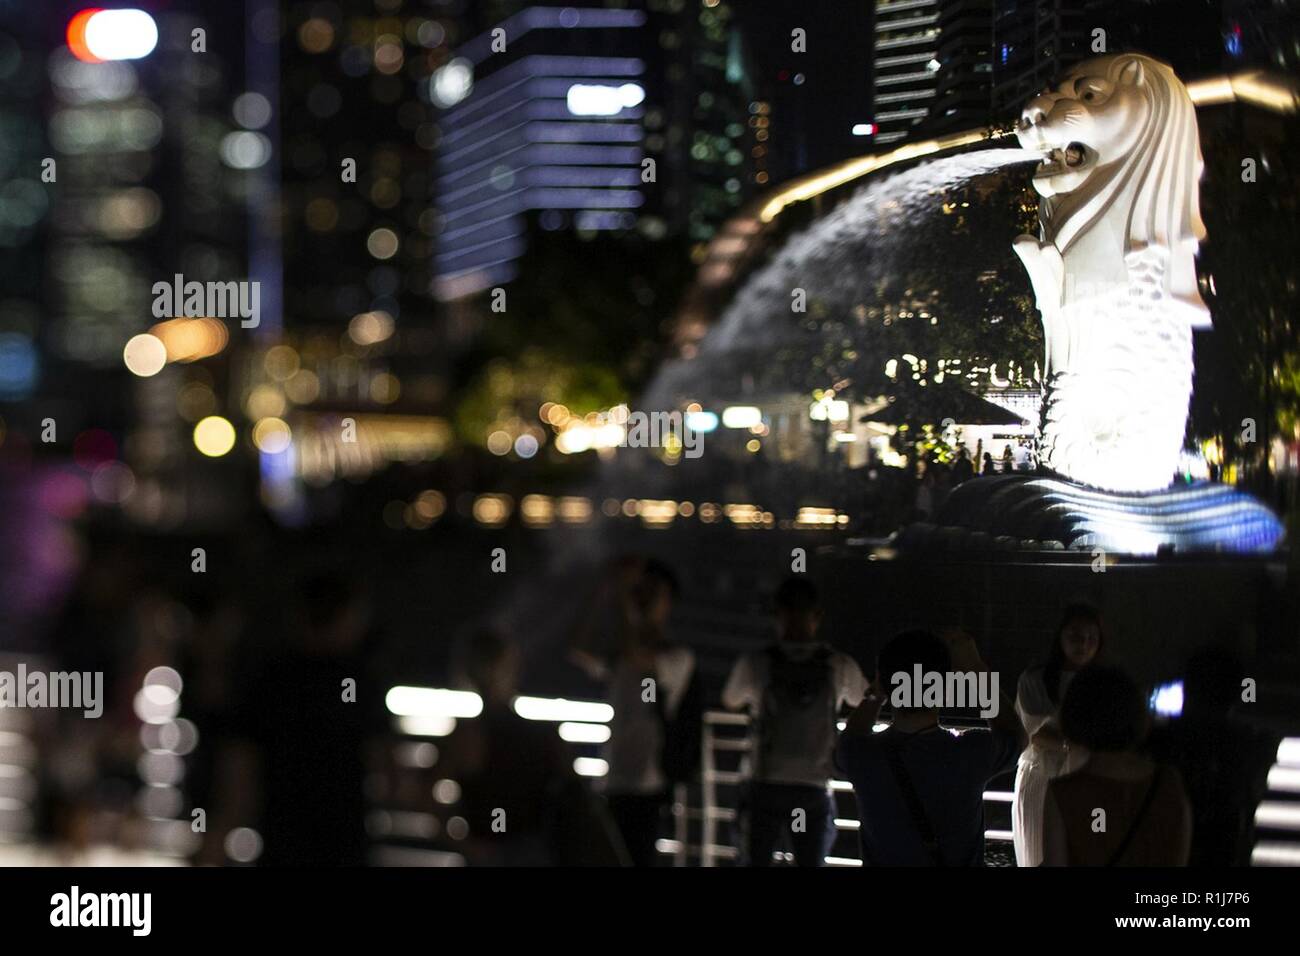 A statue of a Merlion sits a long the Singapore river, Oct. 4, 2018. The Merlion is a national symbol of the island nation of Singapore. Marines and Sailors with the 31st Marine Expeditionary Unit arrived in the “Lion City” aboard the amphibious assault ship USS Wasp (LHD 1) October 2 for a port visit after more than a month at sea during a regularly-scheduled patrol of the Indo-Pacific region. The 31st MEU, the Marine Corps' only continuously forward-deployed MEU, provides a flexible force ready to perform a wide-range of military operations. Stock Photo